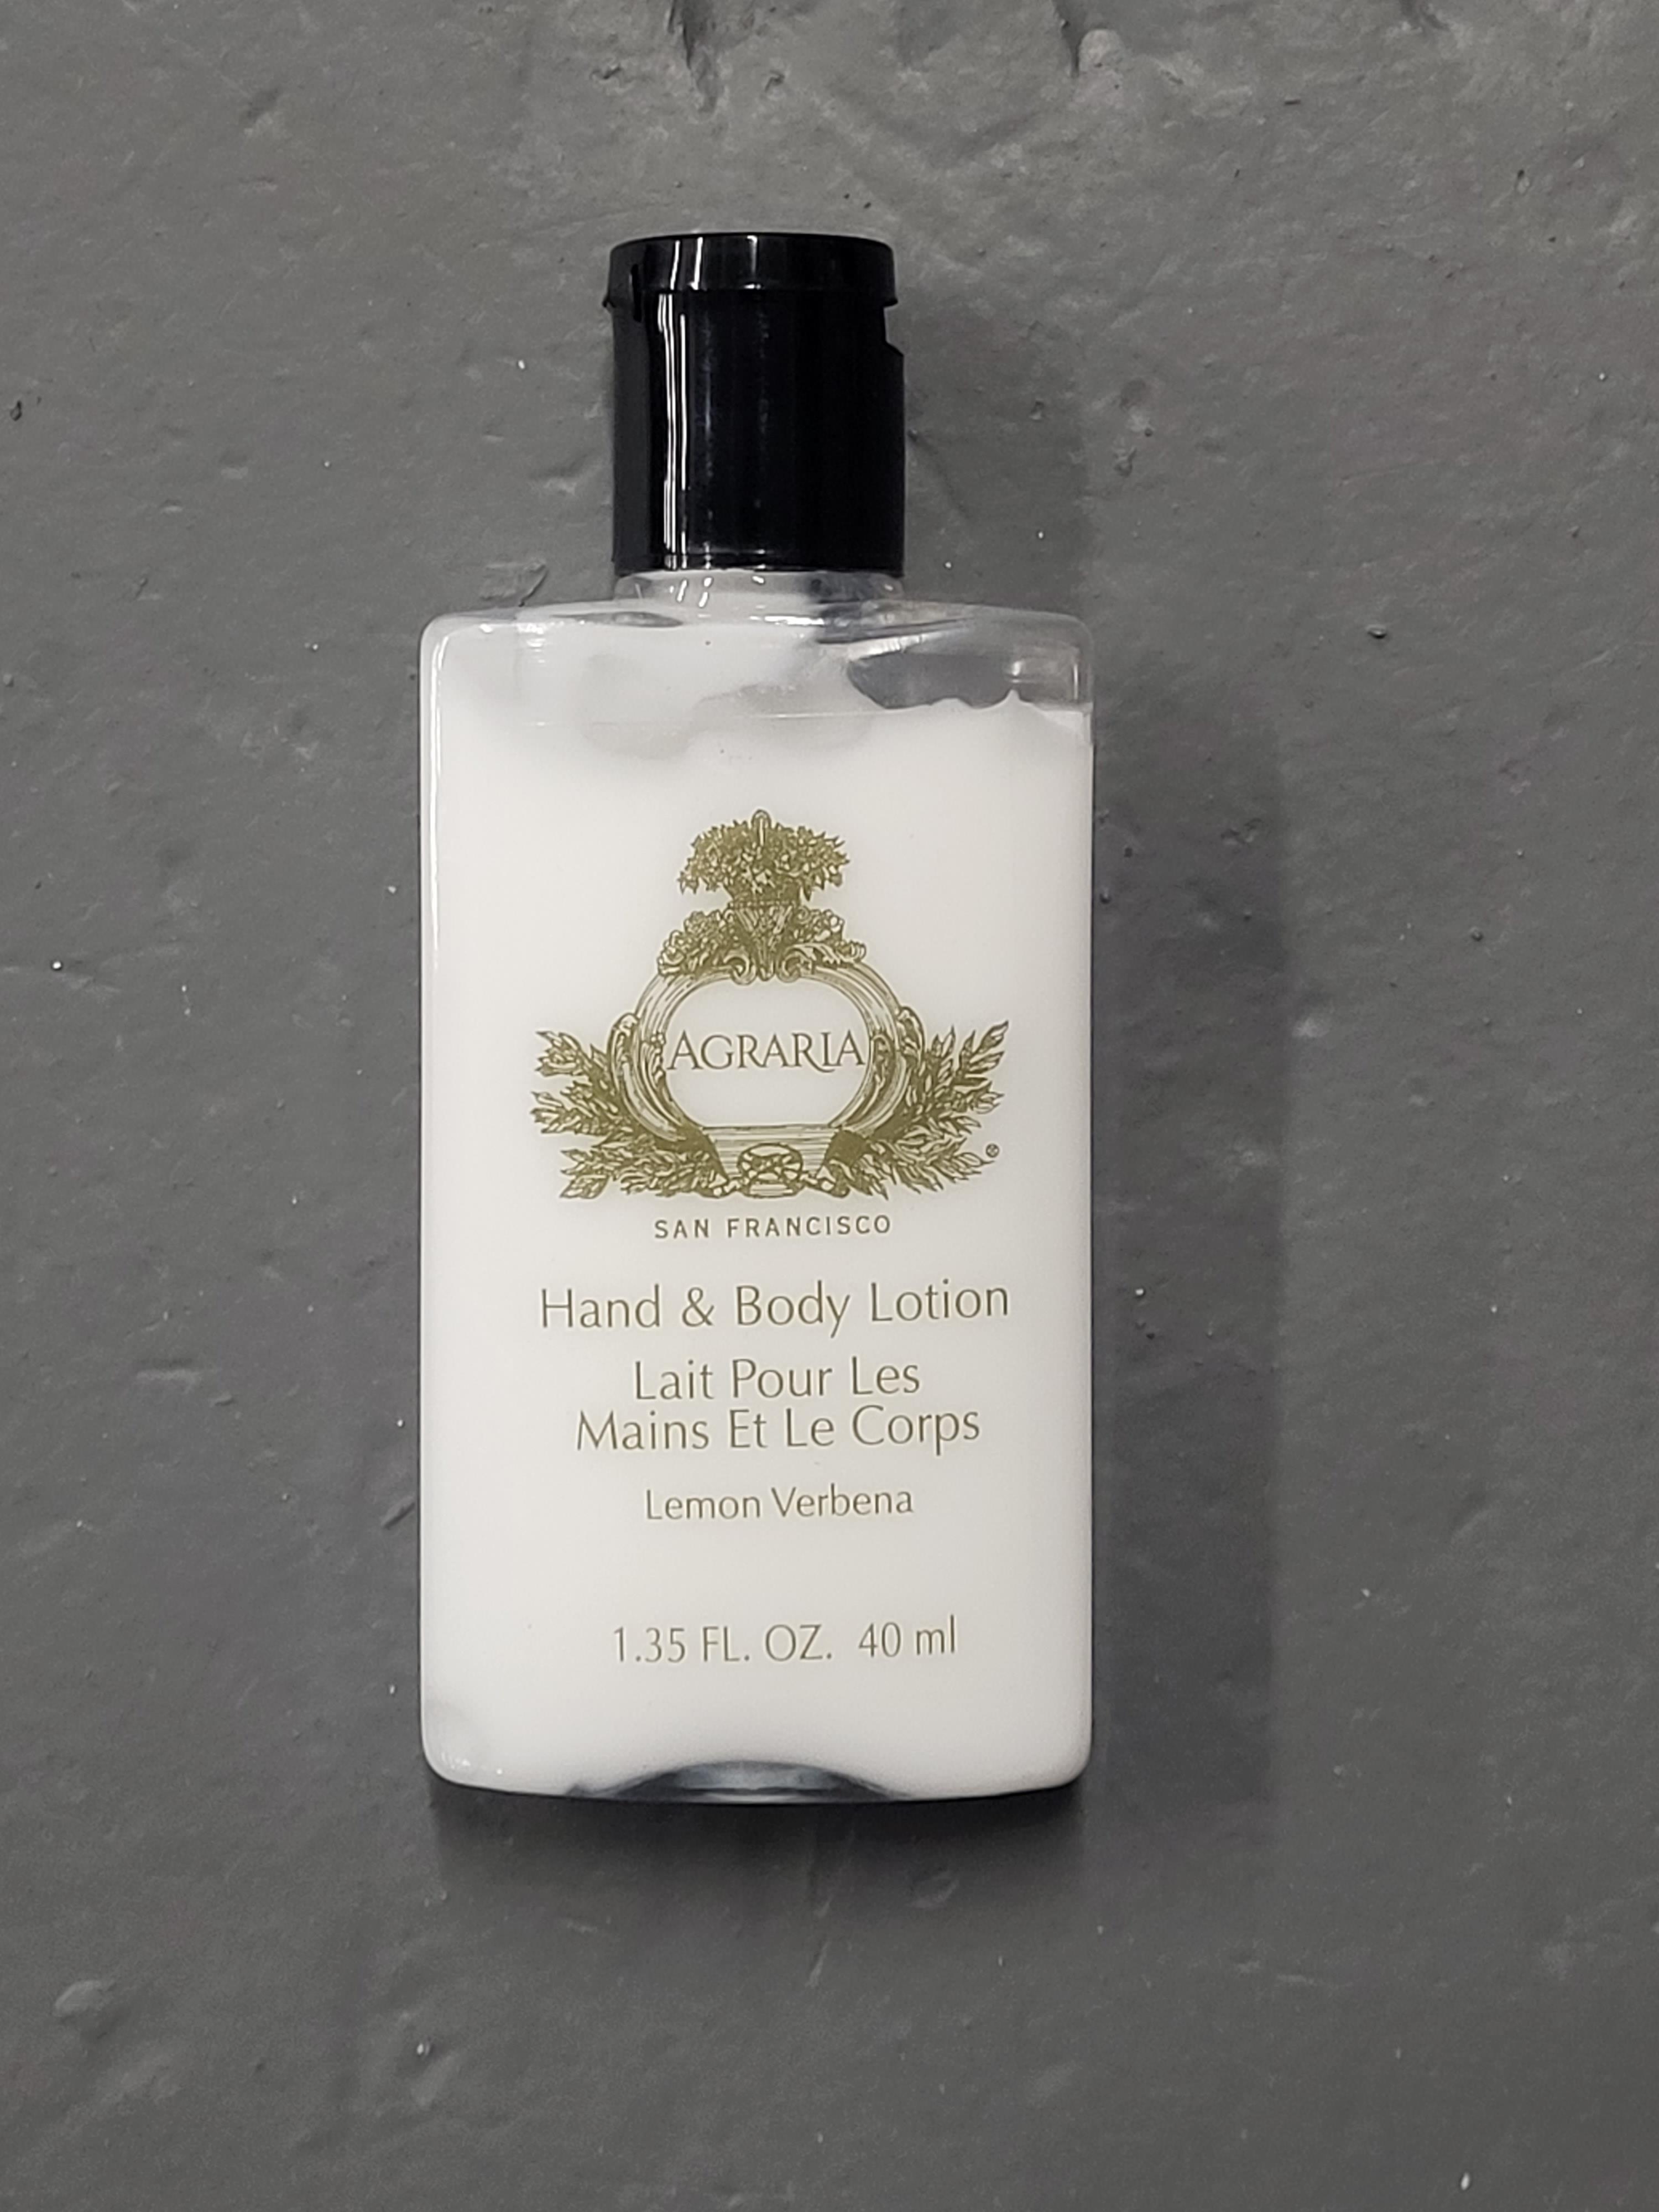 Approximately 140 hand body lotions 40 m - Image 2 of 2